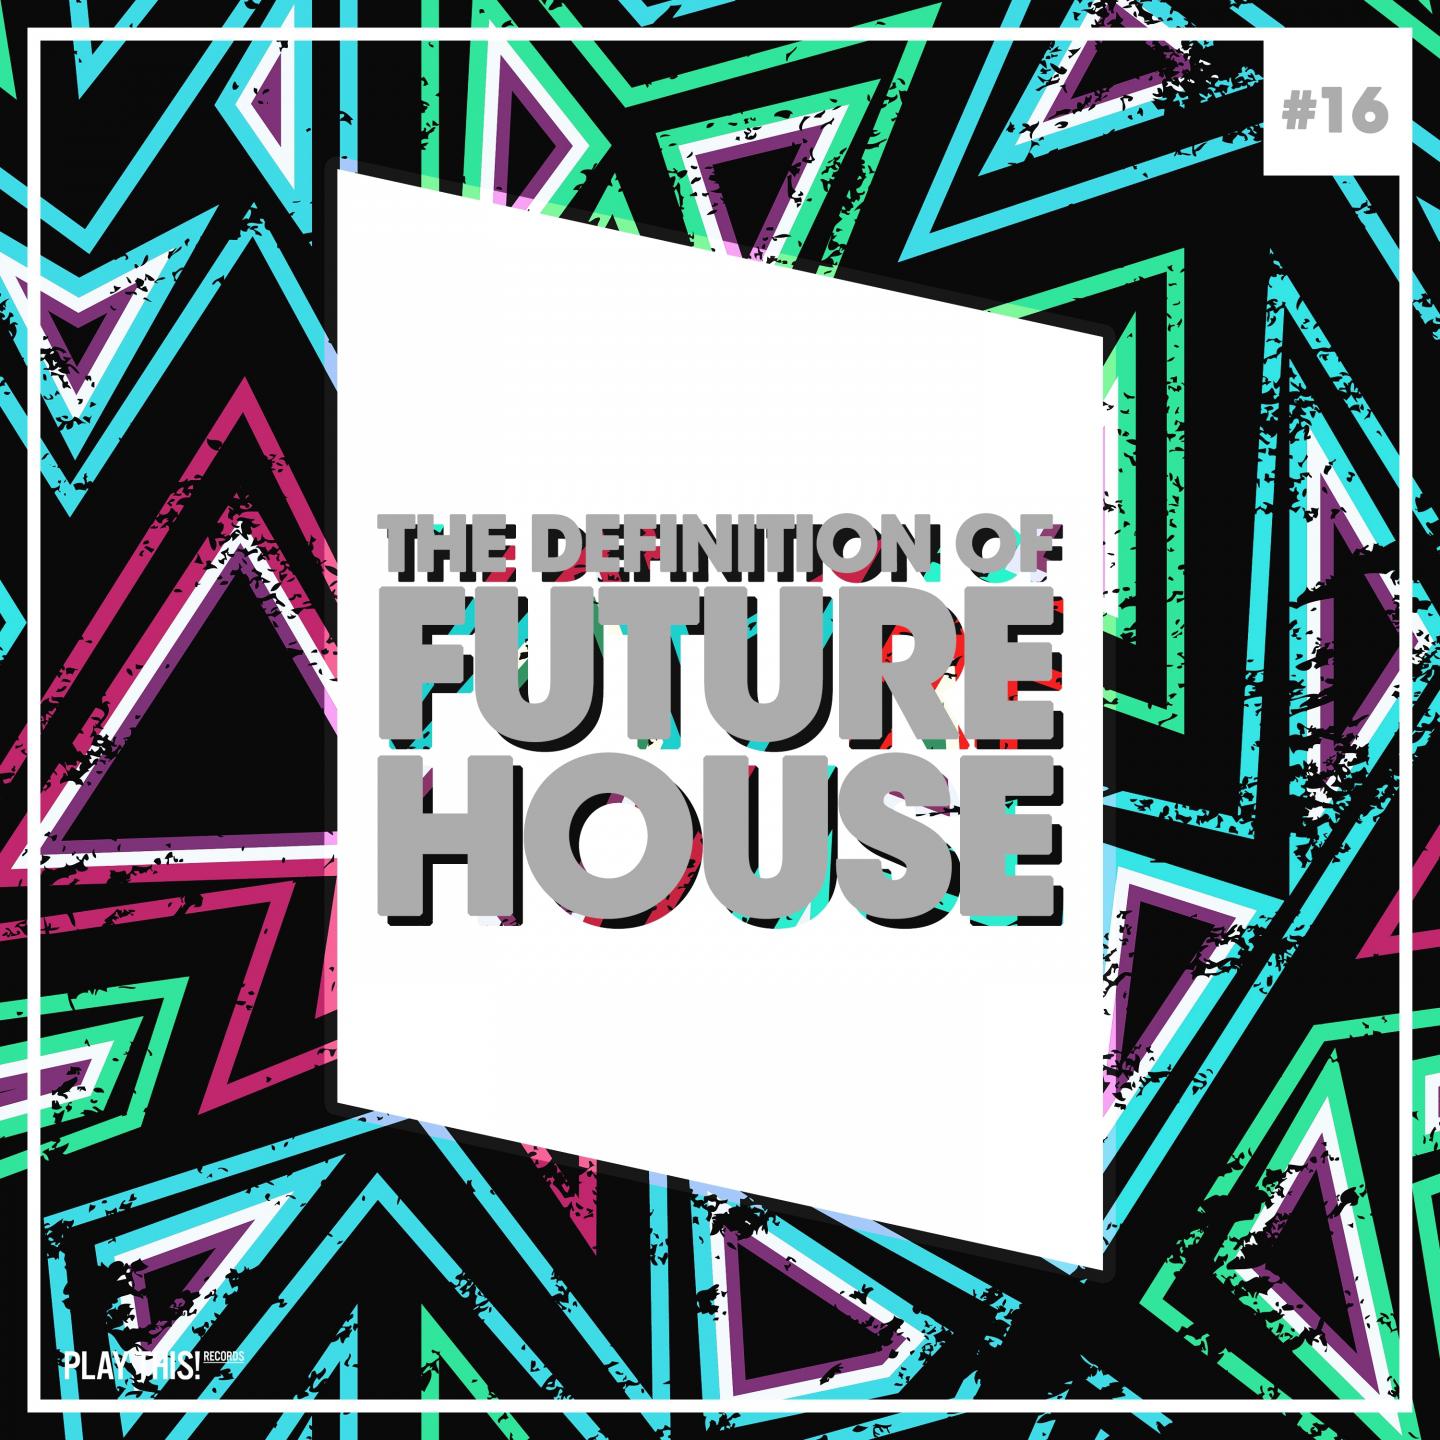 The Definition Of Future House, Vol. 16